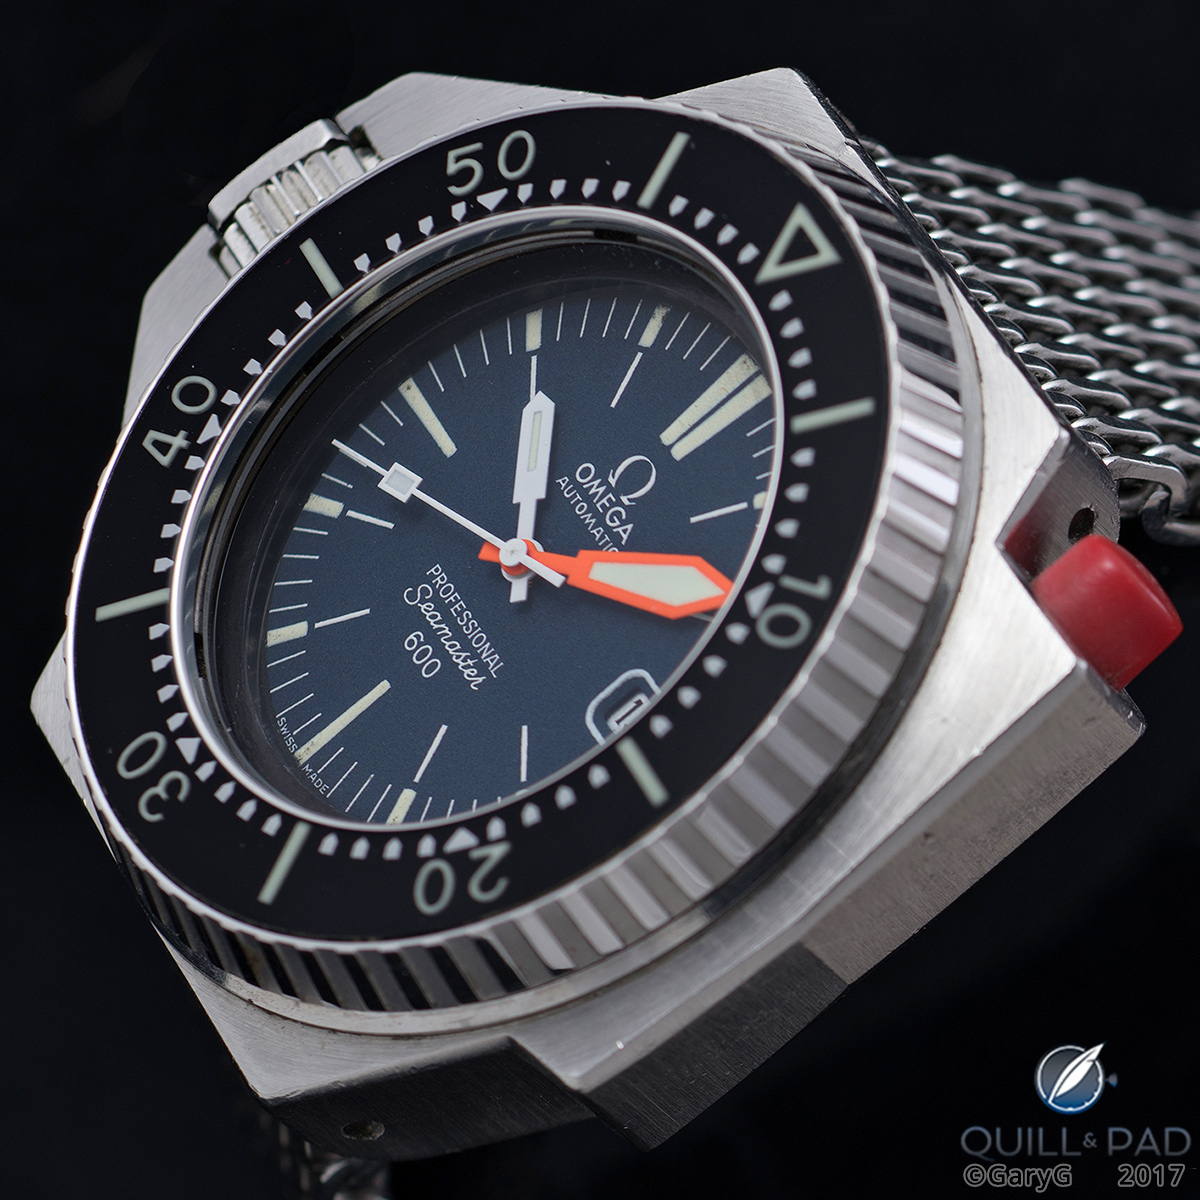 Mix of original and correct replacement components: Omega Seamaster Ploprof